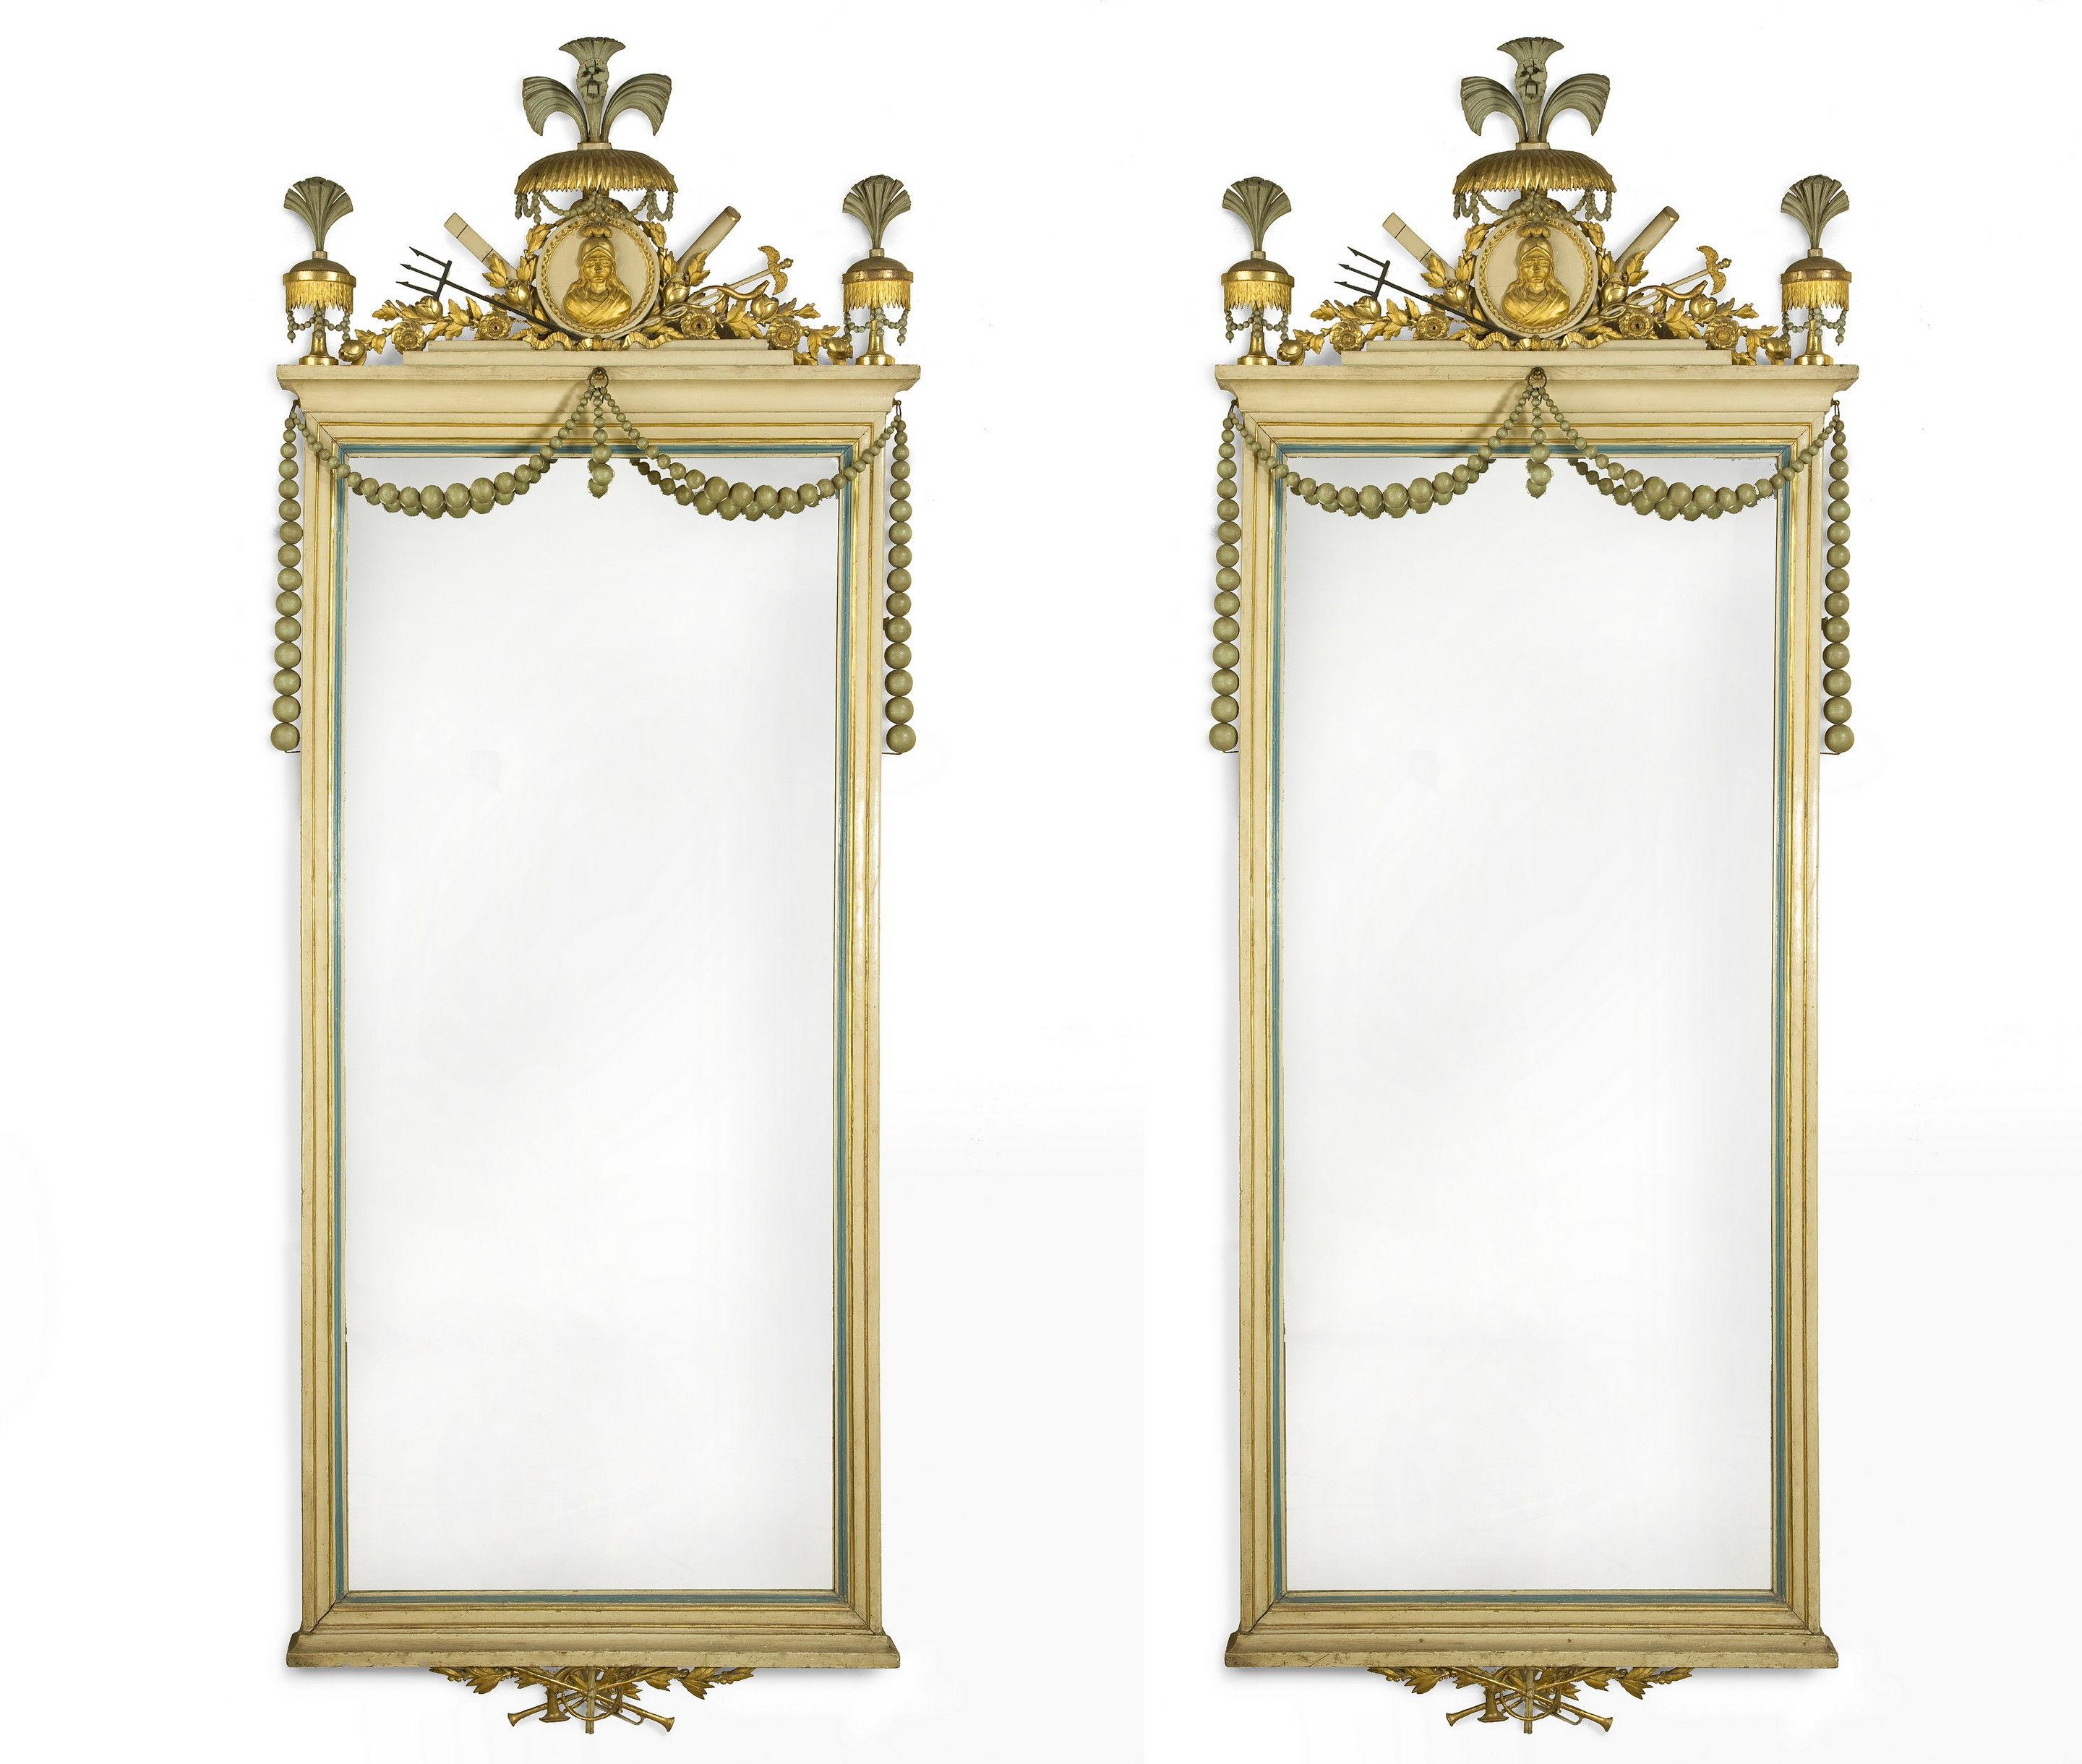 The rectangular mirrors are surmounted by and allegorical crest and hung with strings of graduated beads, painted in cream, blue and grey with gilding.
